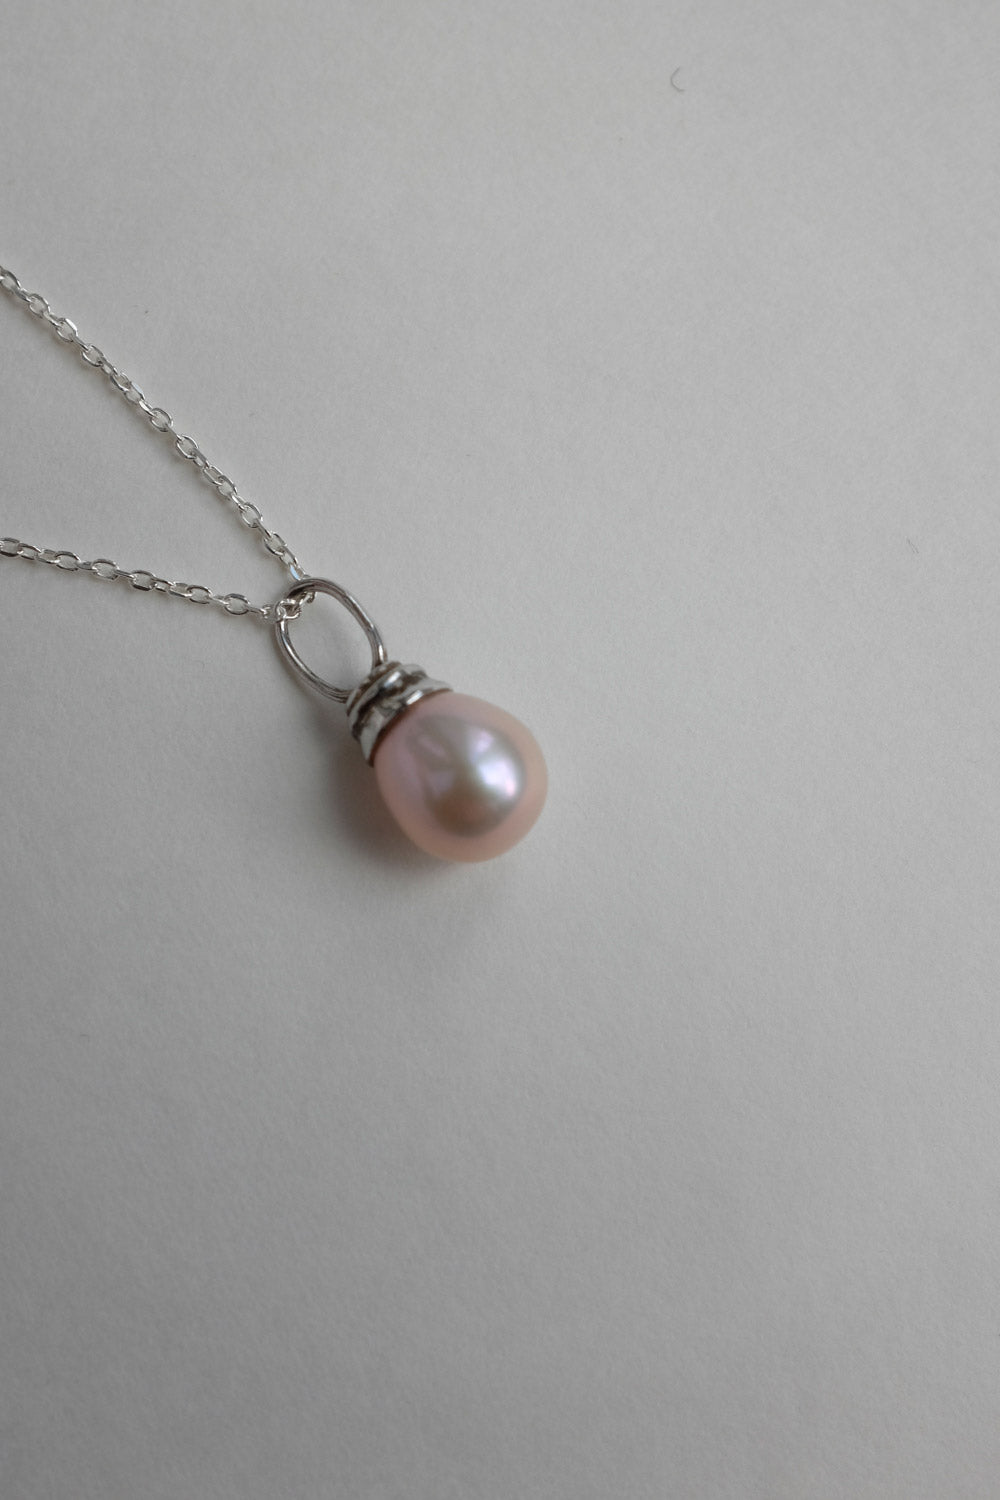 0029_SIMPLE LONG ROSE PEARL NECKLACE 925